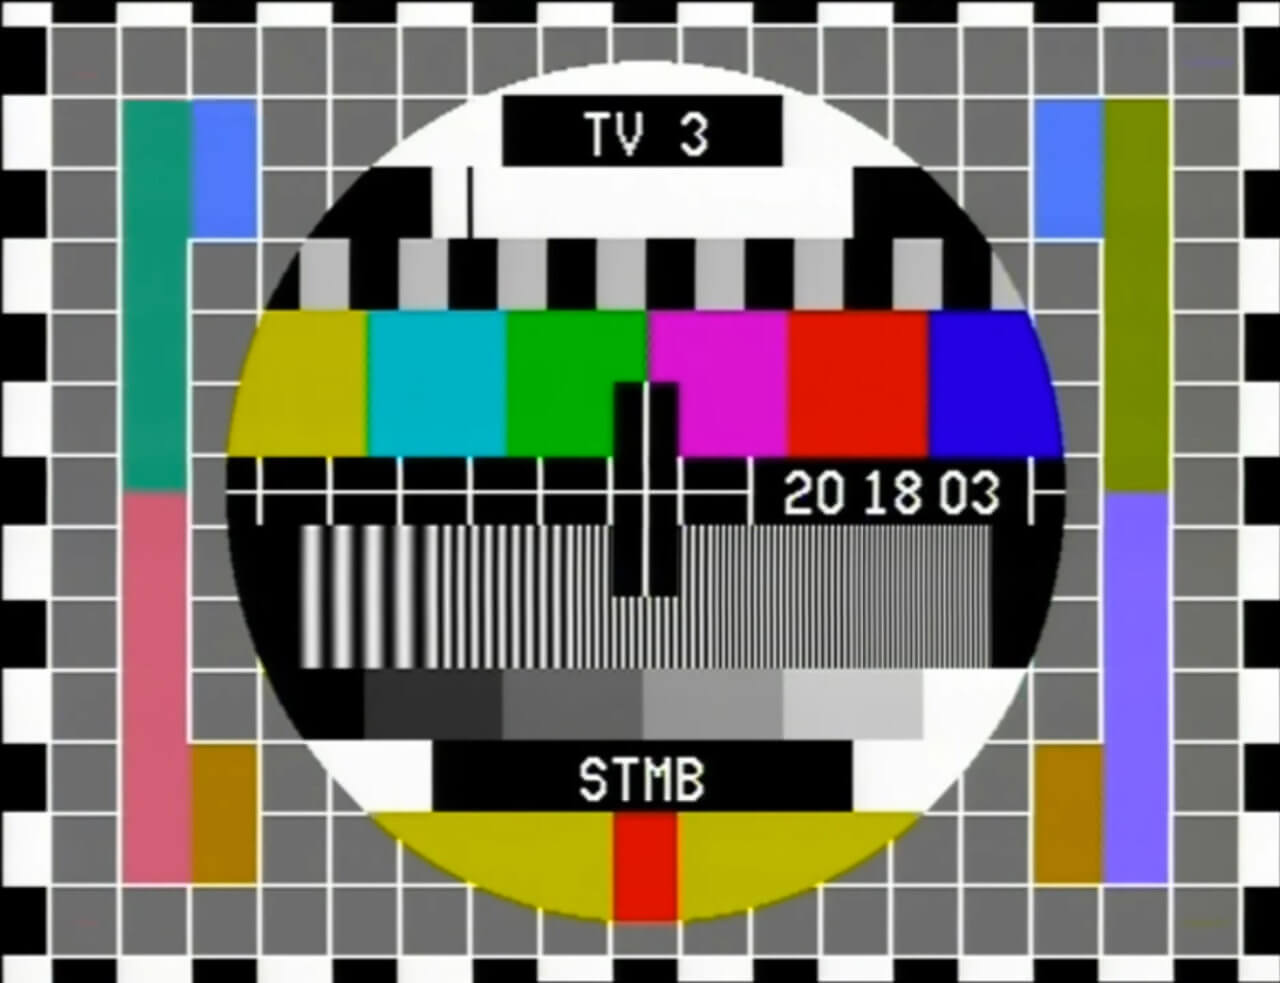 TV3 using PM5544, a common PAL test pattern